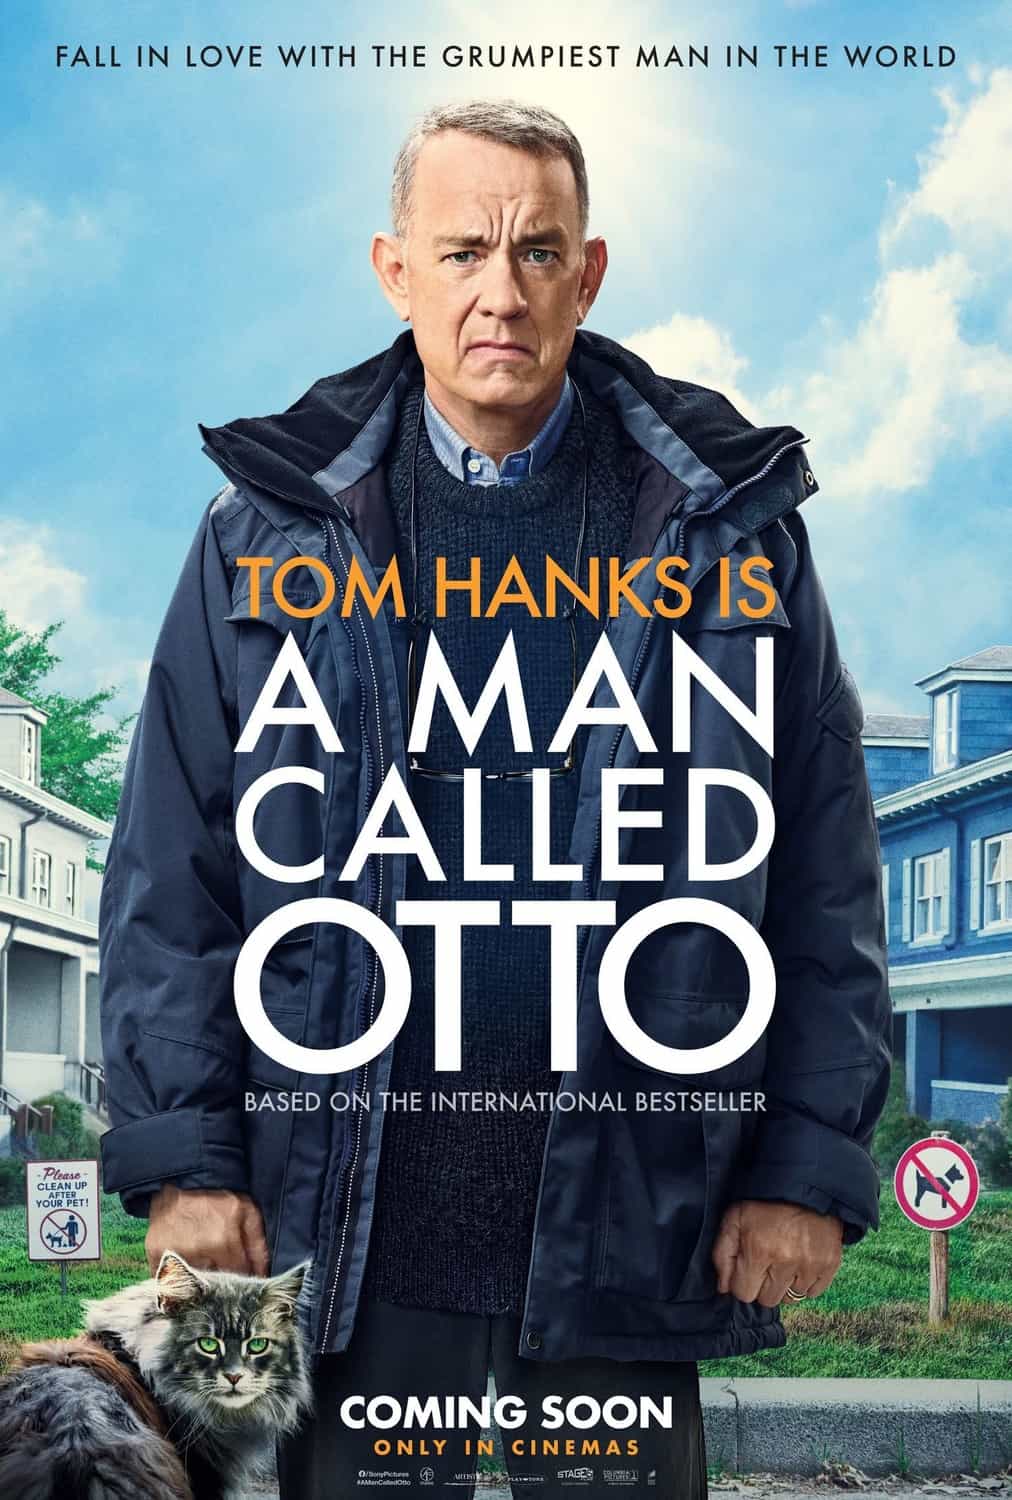 New poster released for A Man Called Otto starring Tom Hanks - movie UK release date 6th January 2023 #amancalledotto